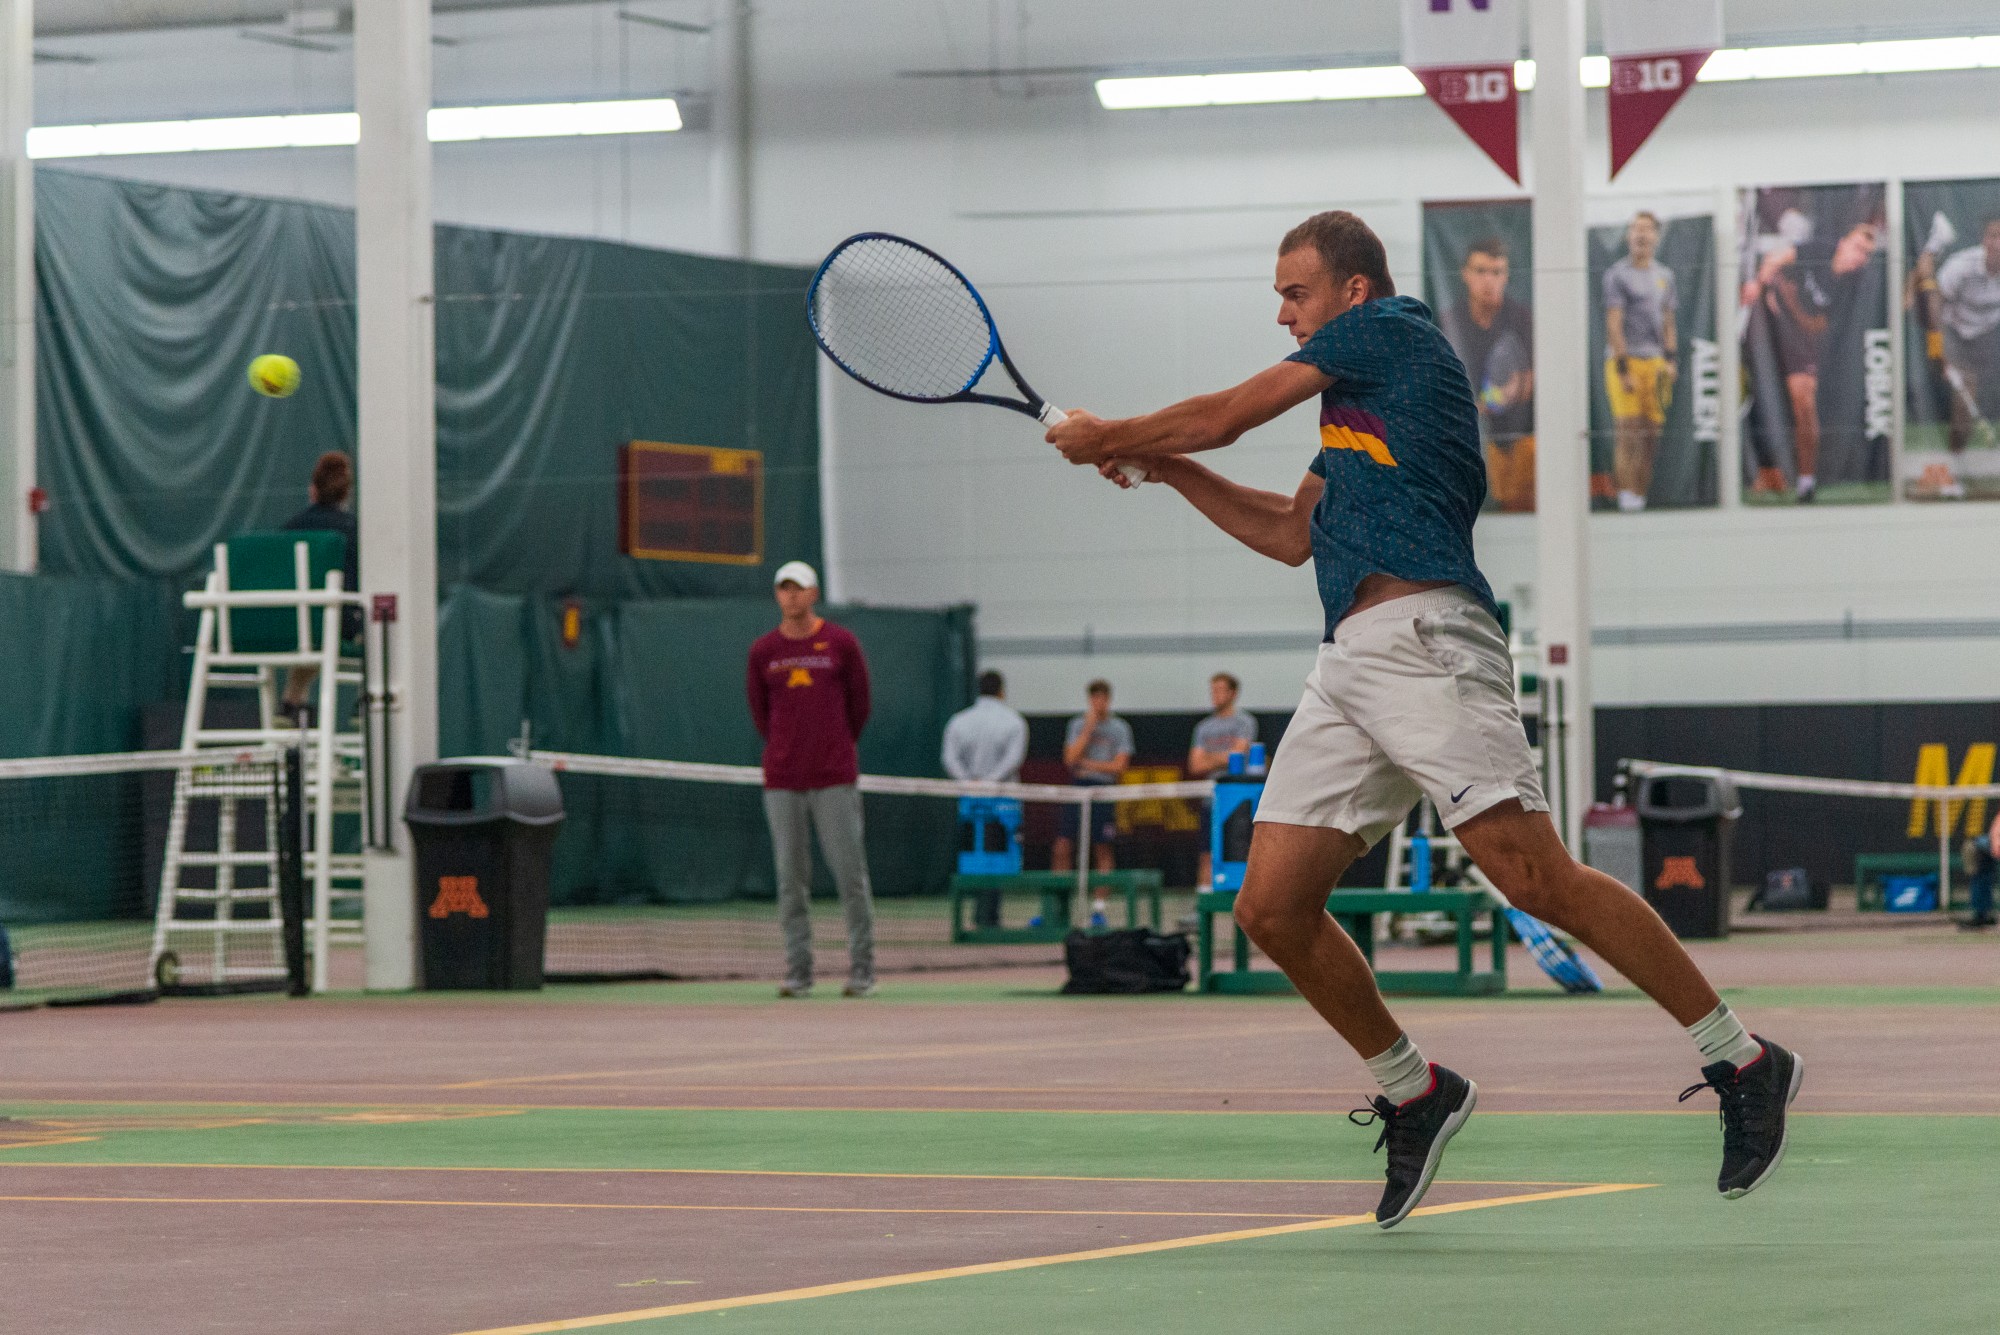 Gophers Junior Vlad Lobak competes in a doubles tennis match against Auburn University at Baseline Tennis Center on Friday, Jan. 31.